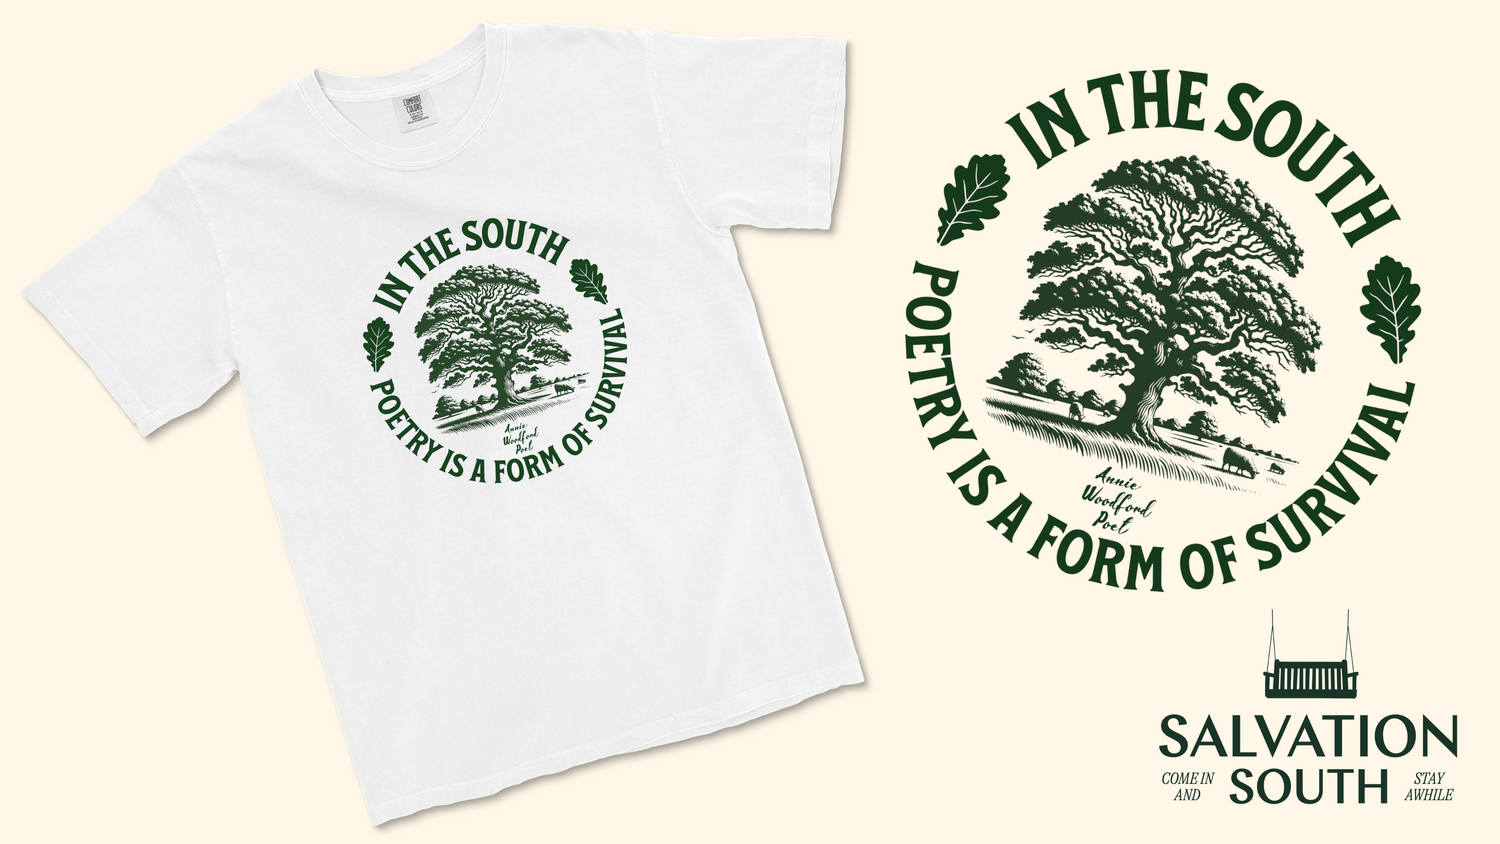 Salvation South Poetry is a form of survival shirt